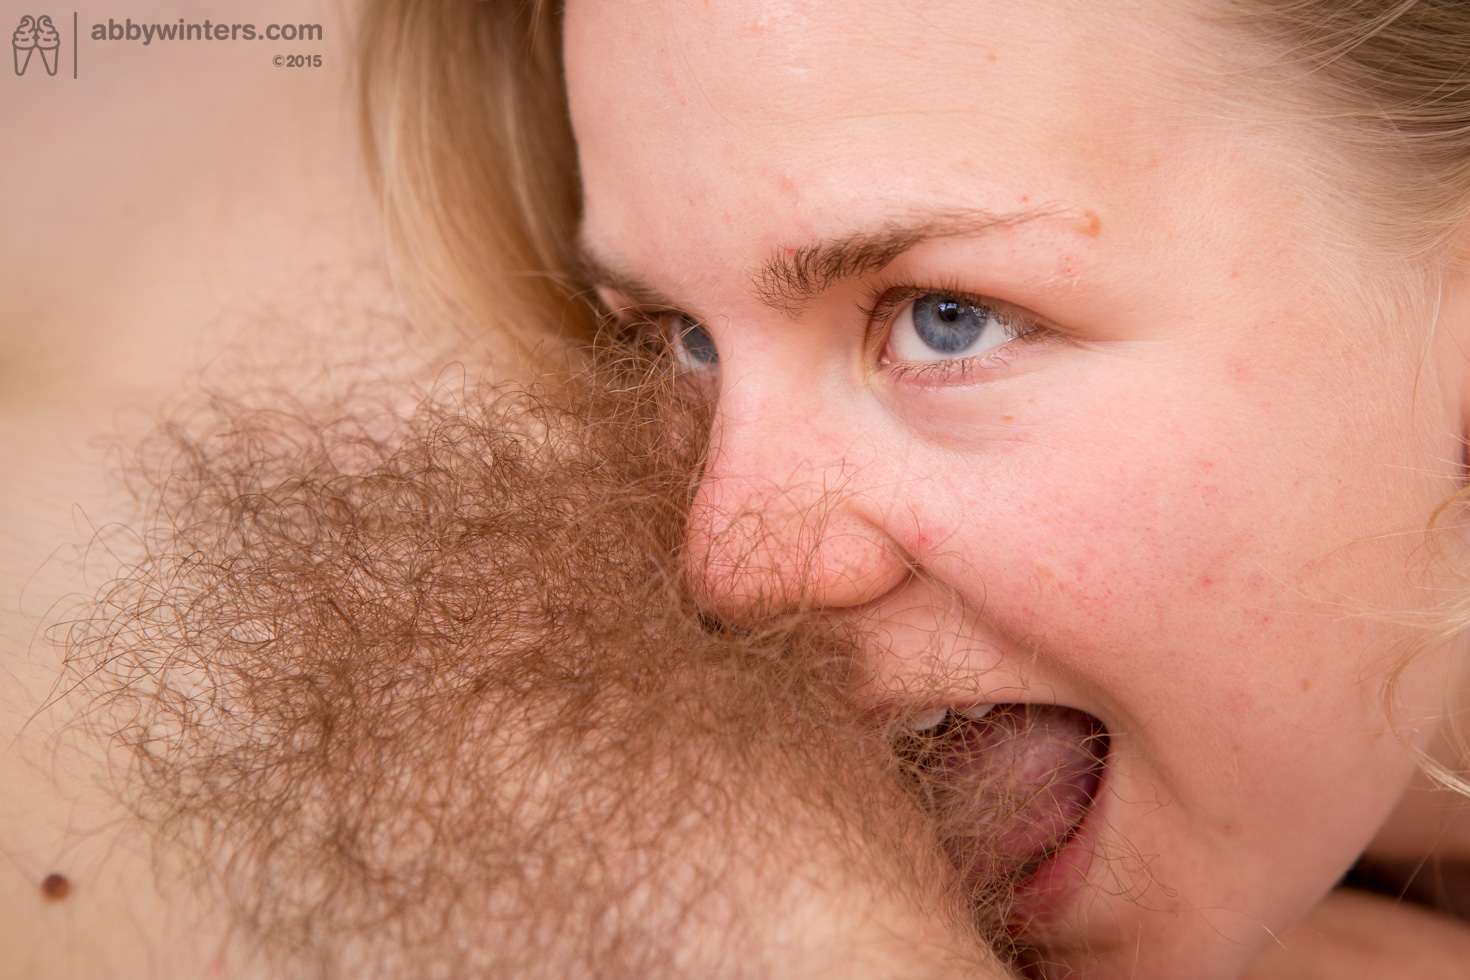 Hairy Pussy Fisting - Fisting hairy pussy | The Hairy Lady Blog